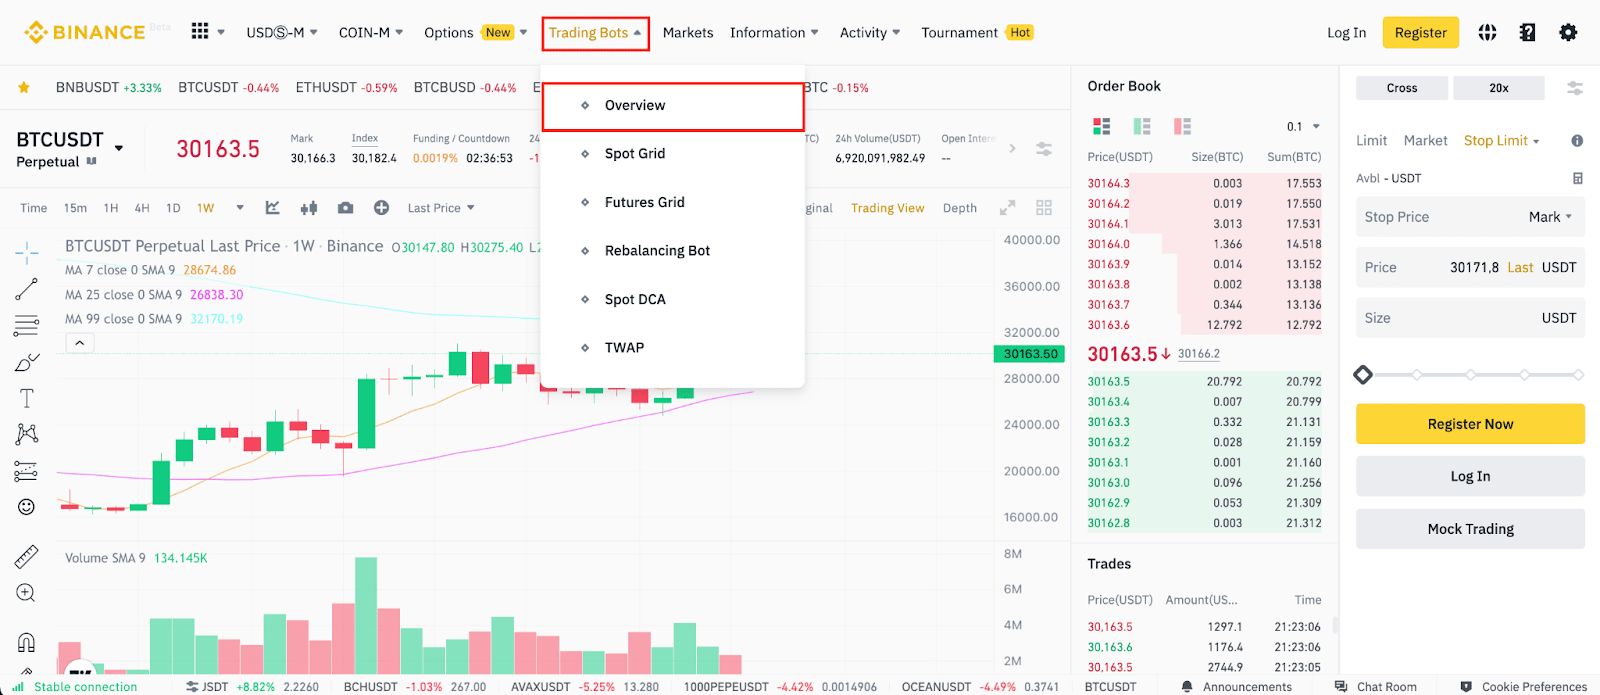 STEROID | Bot for Binance Futures. Try for FREE!